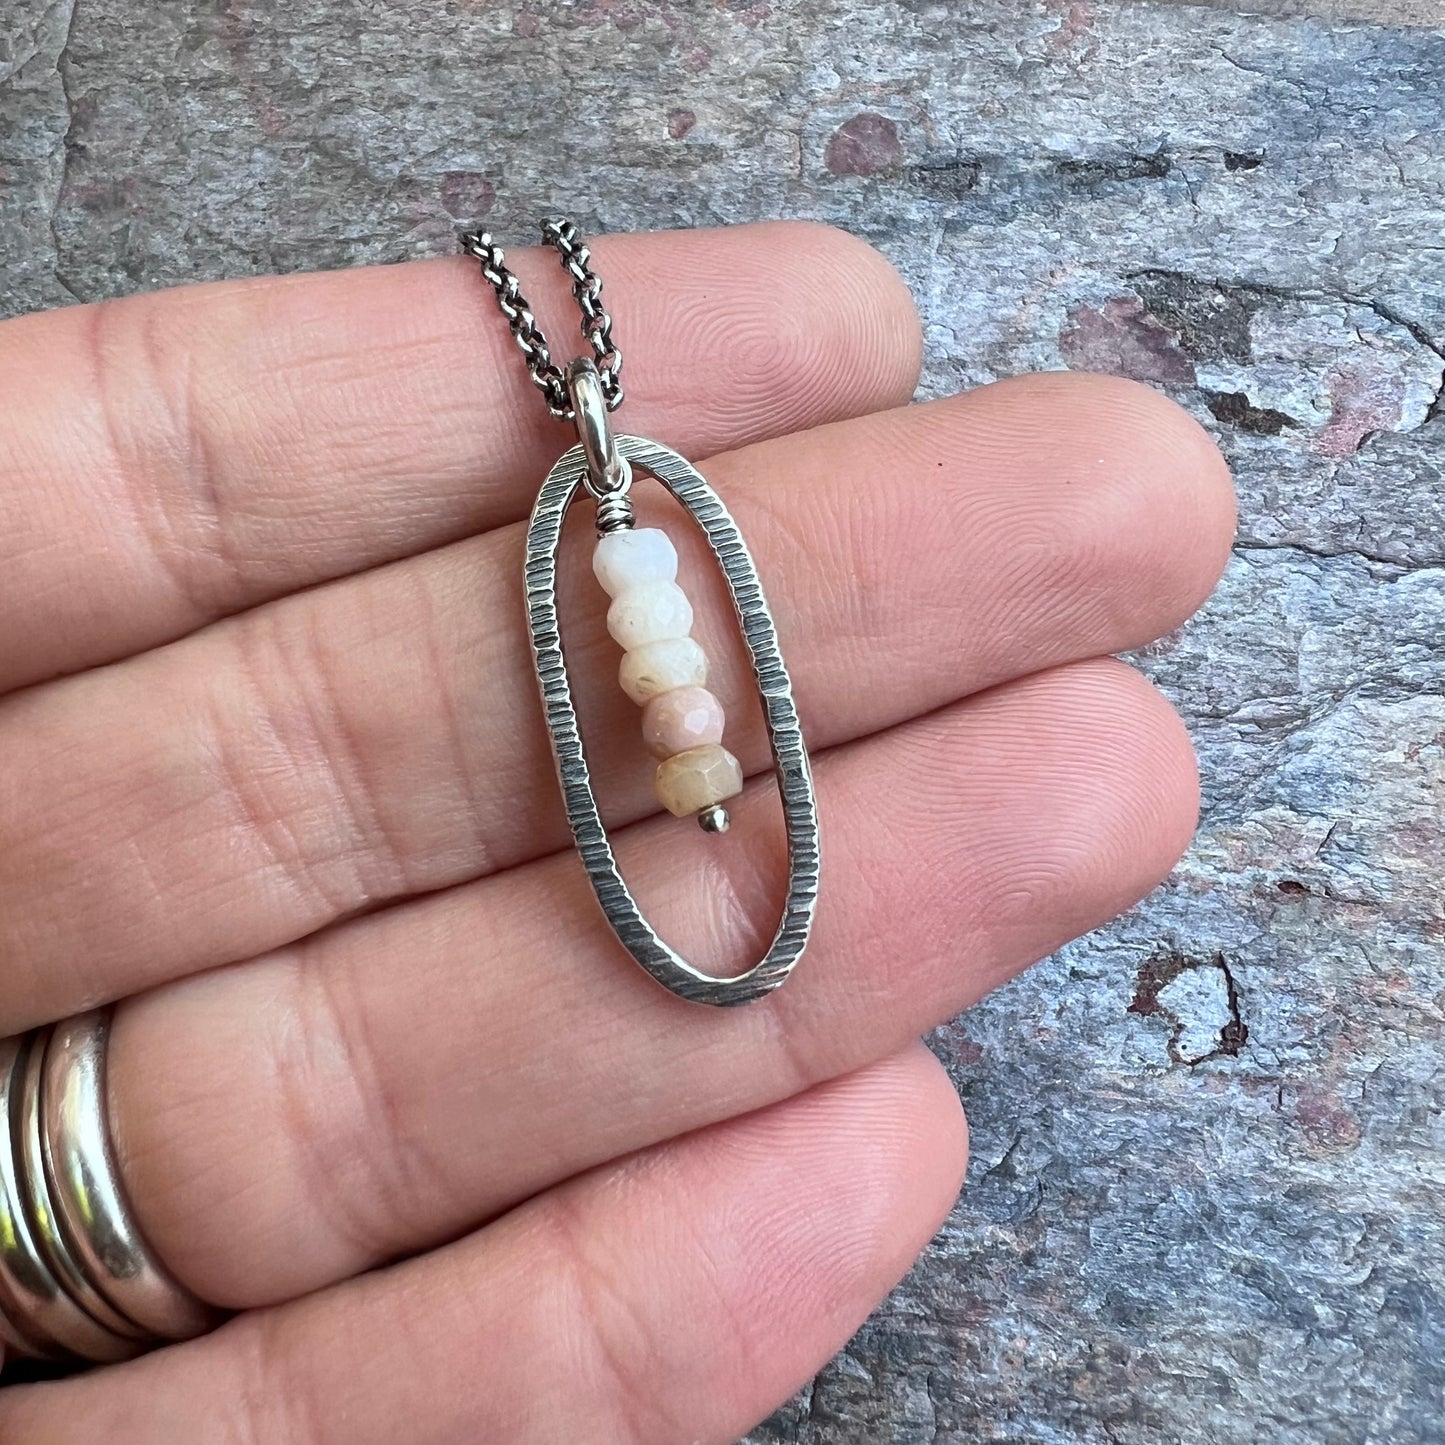 Pink Opal Sterling Silver Necklace - Genuine Pink Opal and Sterling Silver Elongated Pendant on Sterling Silver Chain